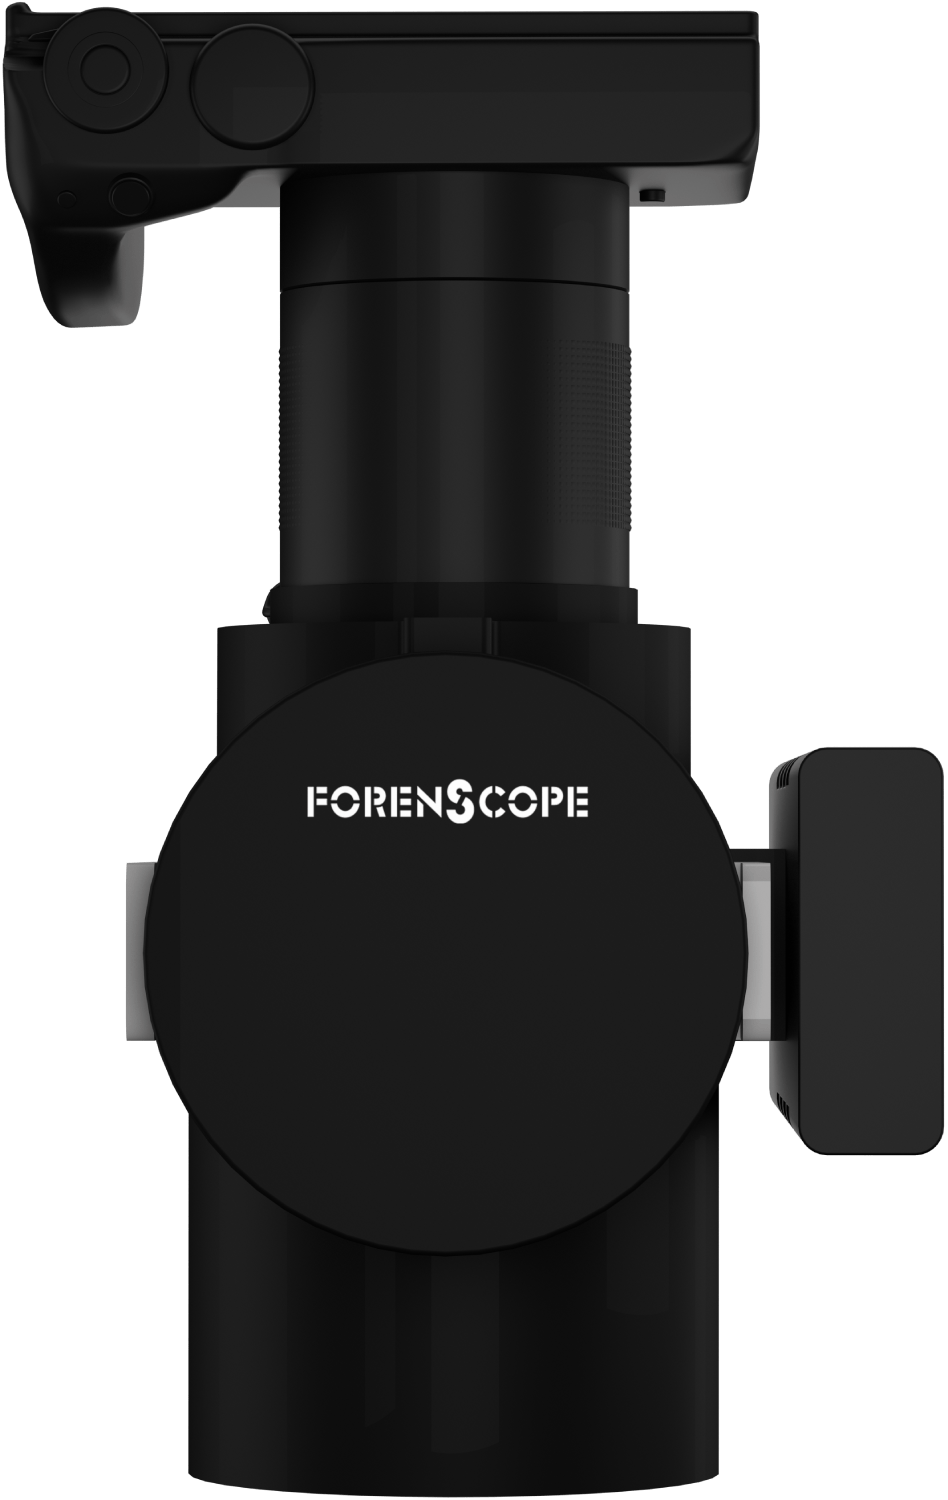 Contactless Evidence Imaging System - ForenScope